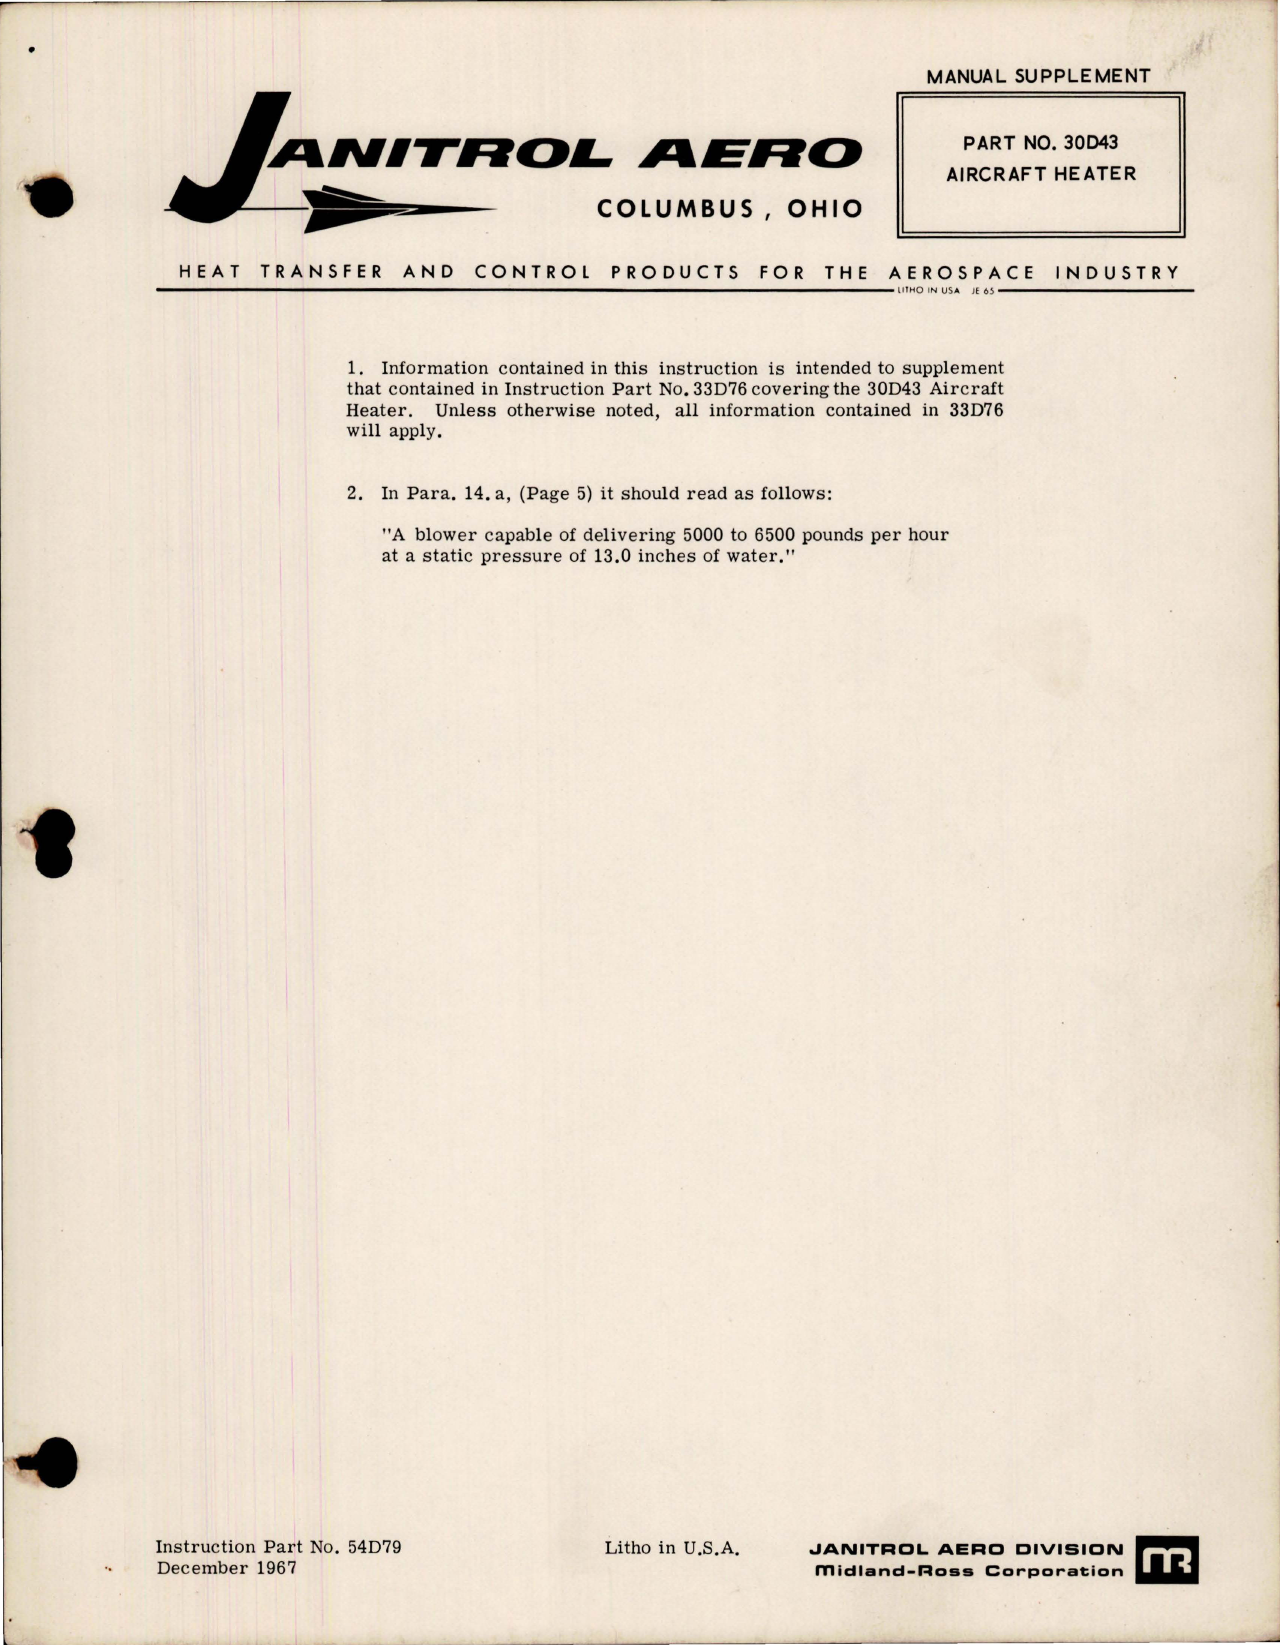 Sample page 1 from AirCorps Library document: Manual Supplement for Aircraft Heater - Part 30D43 